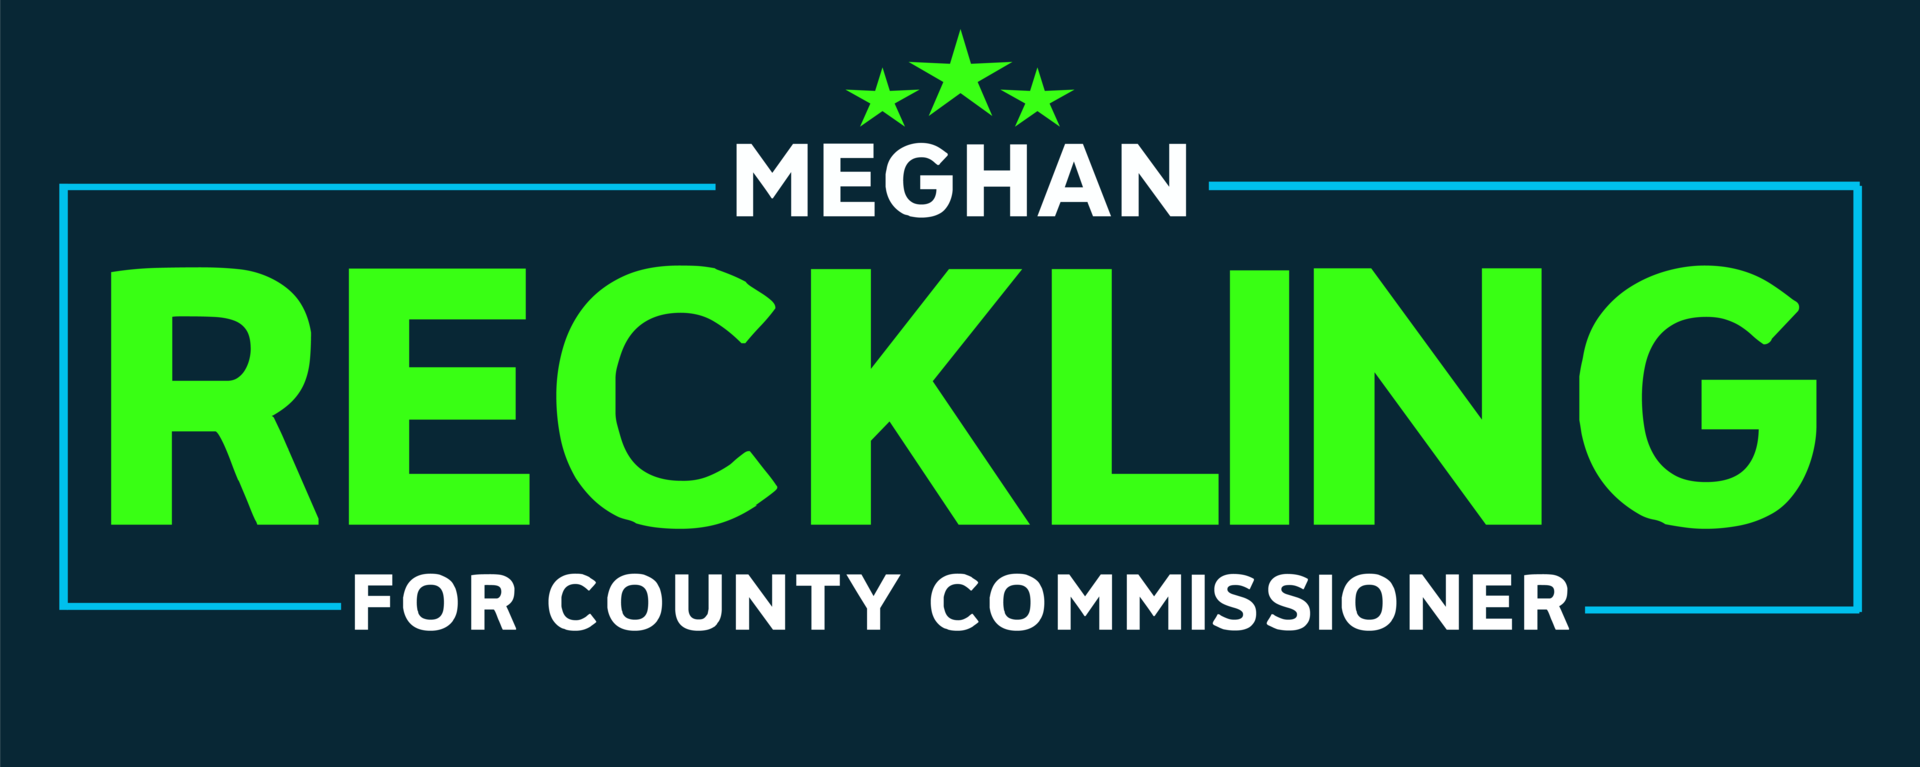 Reckling county commissioner logo green